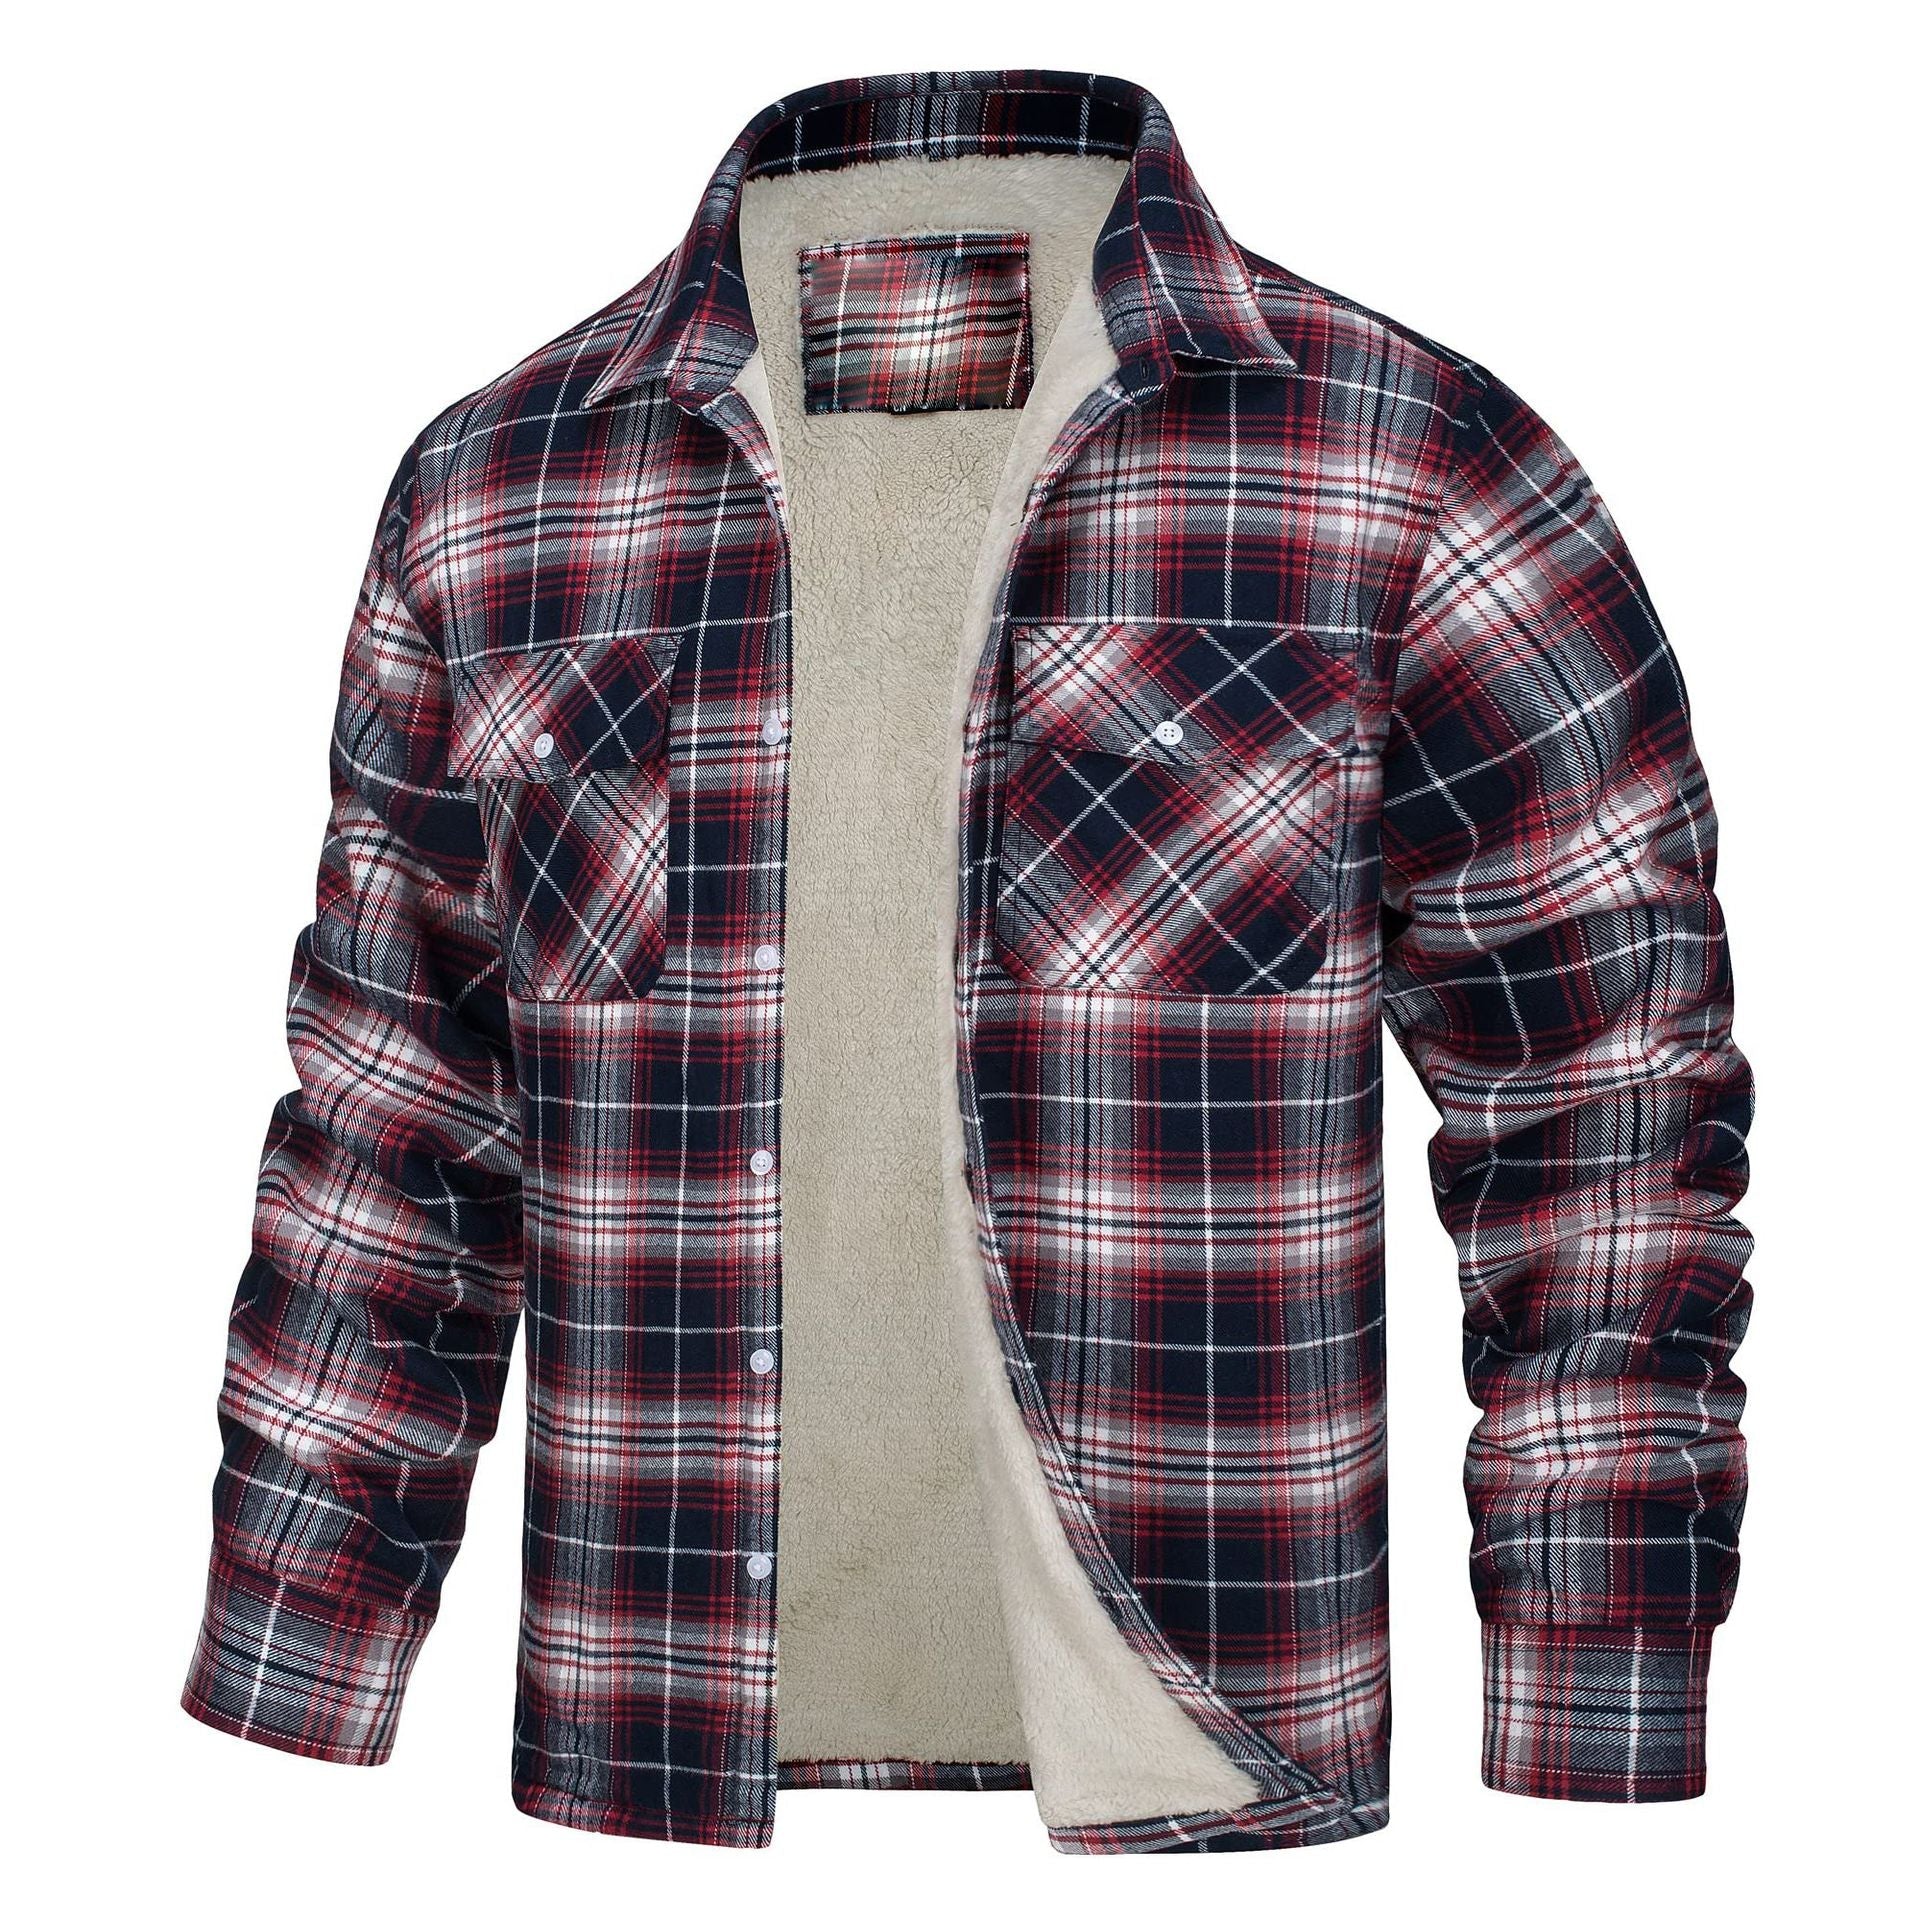 Casual Long Sleeves Thicken Shirts Jackets for Men-Wine Red-S-Free Shipping at meselling99